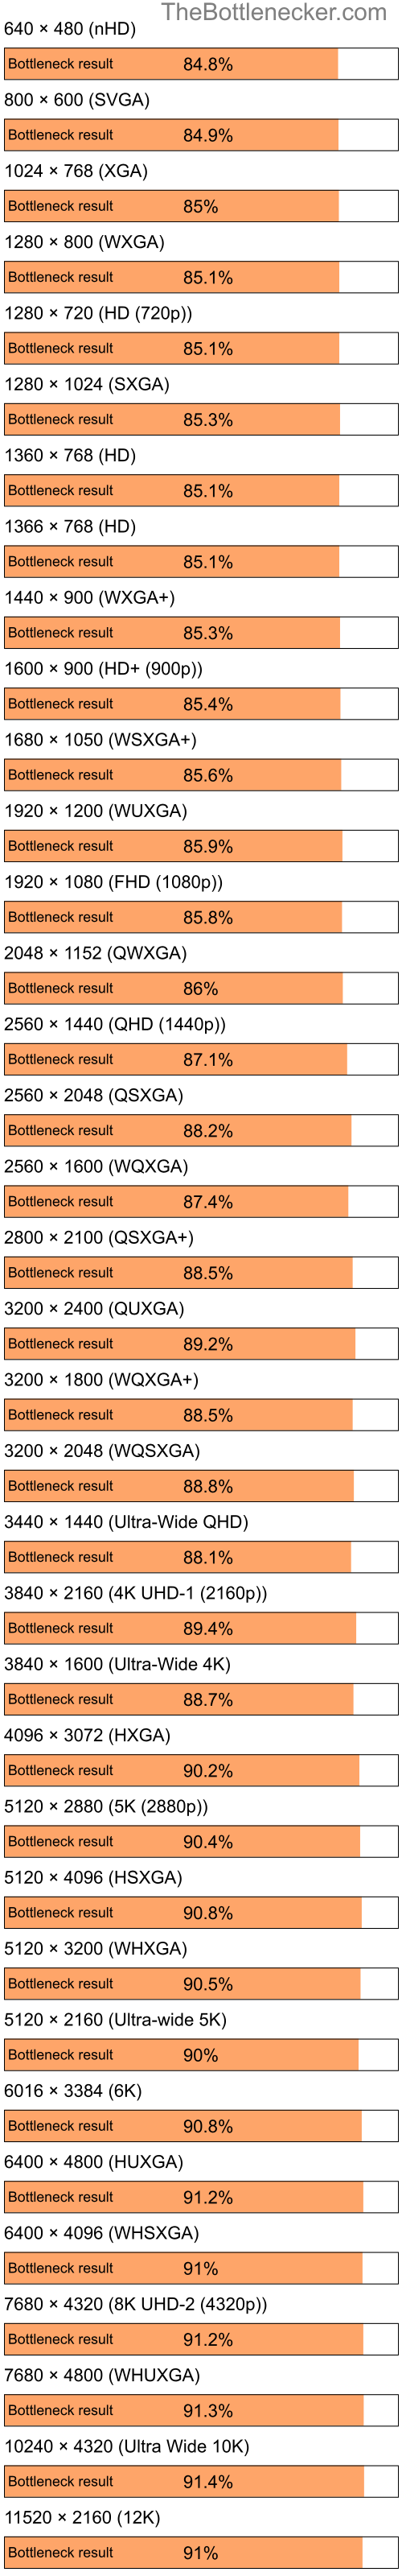 Bottleneck results by resolution for Intel Celeron M 420 and NVIDIA GeForce 6150 in Graphic Card Intense Tasks